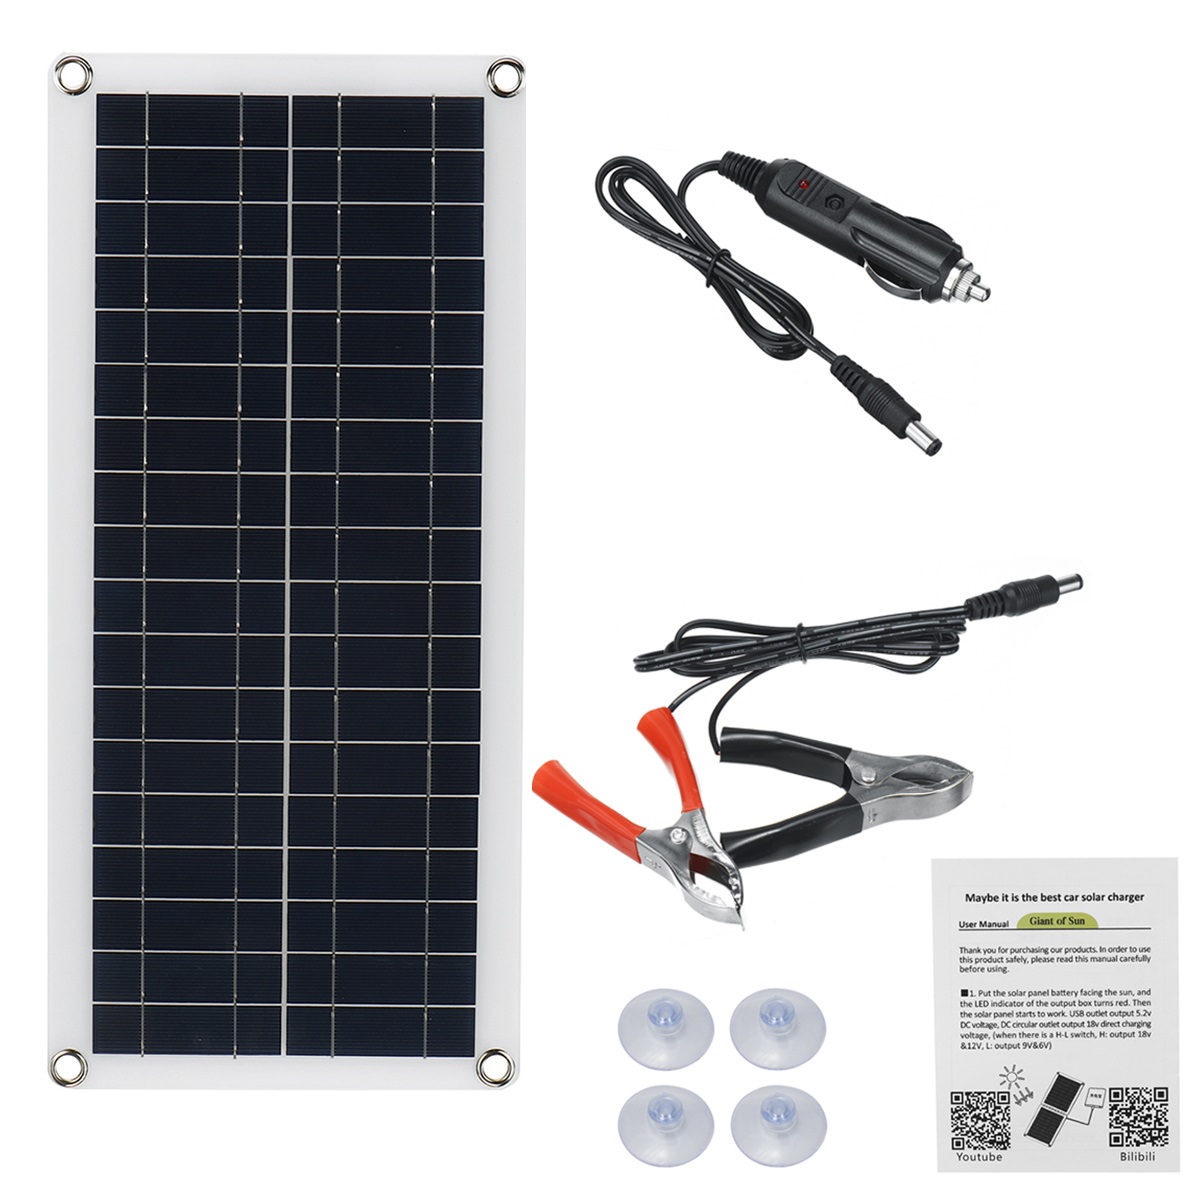 30W-Solar-Panel-Kit-12V-Battery-Charger-100A-Controller-USB-RV-Travel-Camping-1721762-1